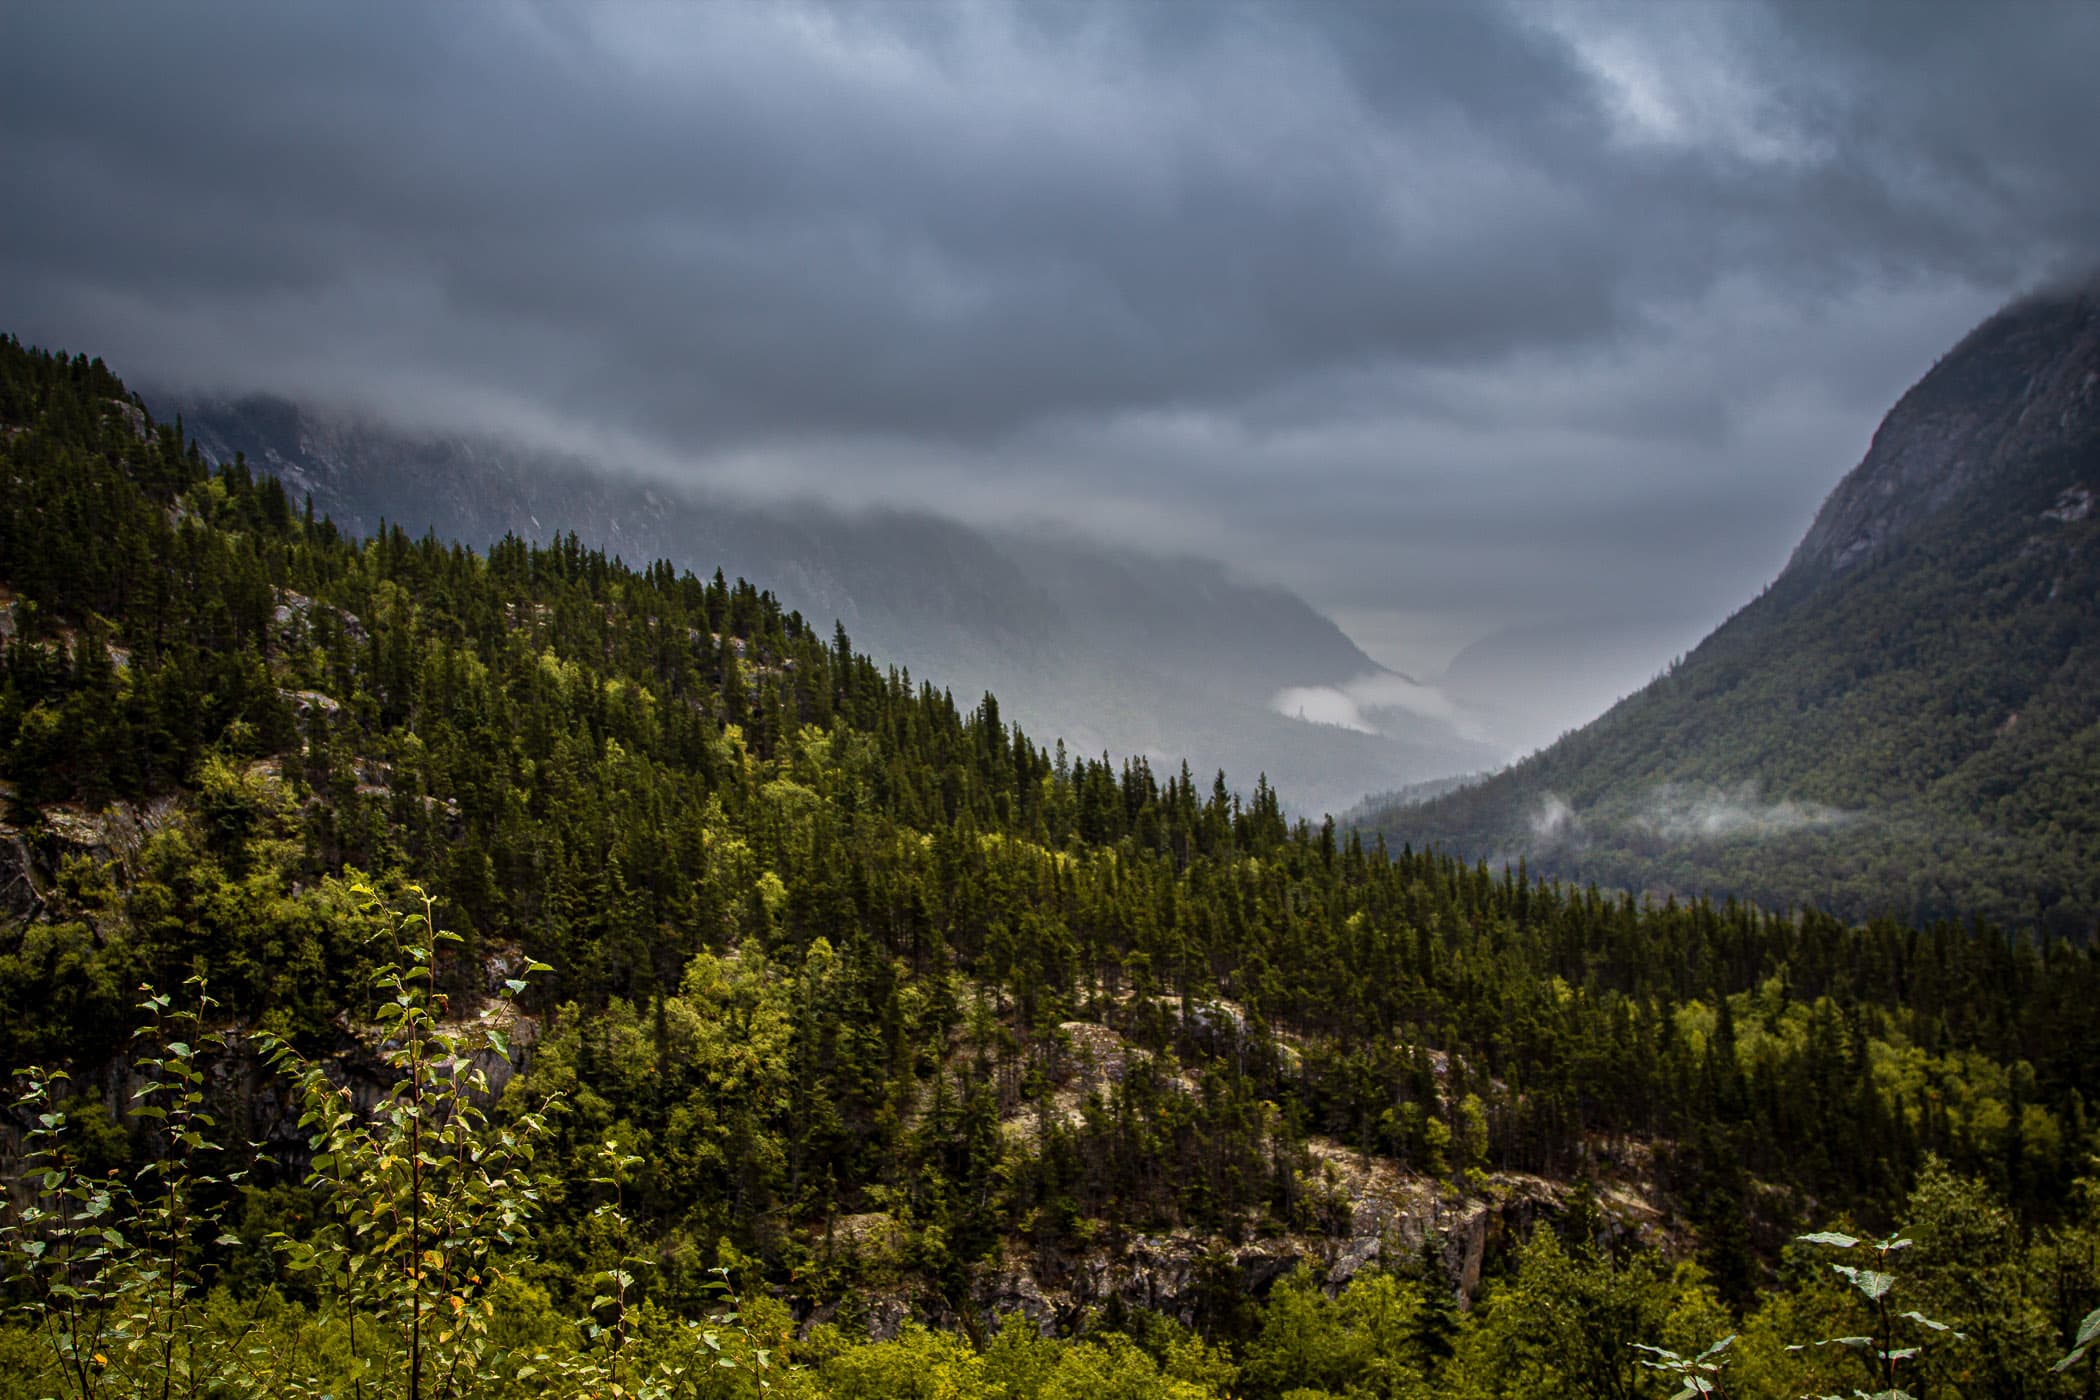 A foggy valley among the mountains just northeast of Skagway, Alaska.